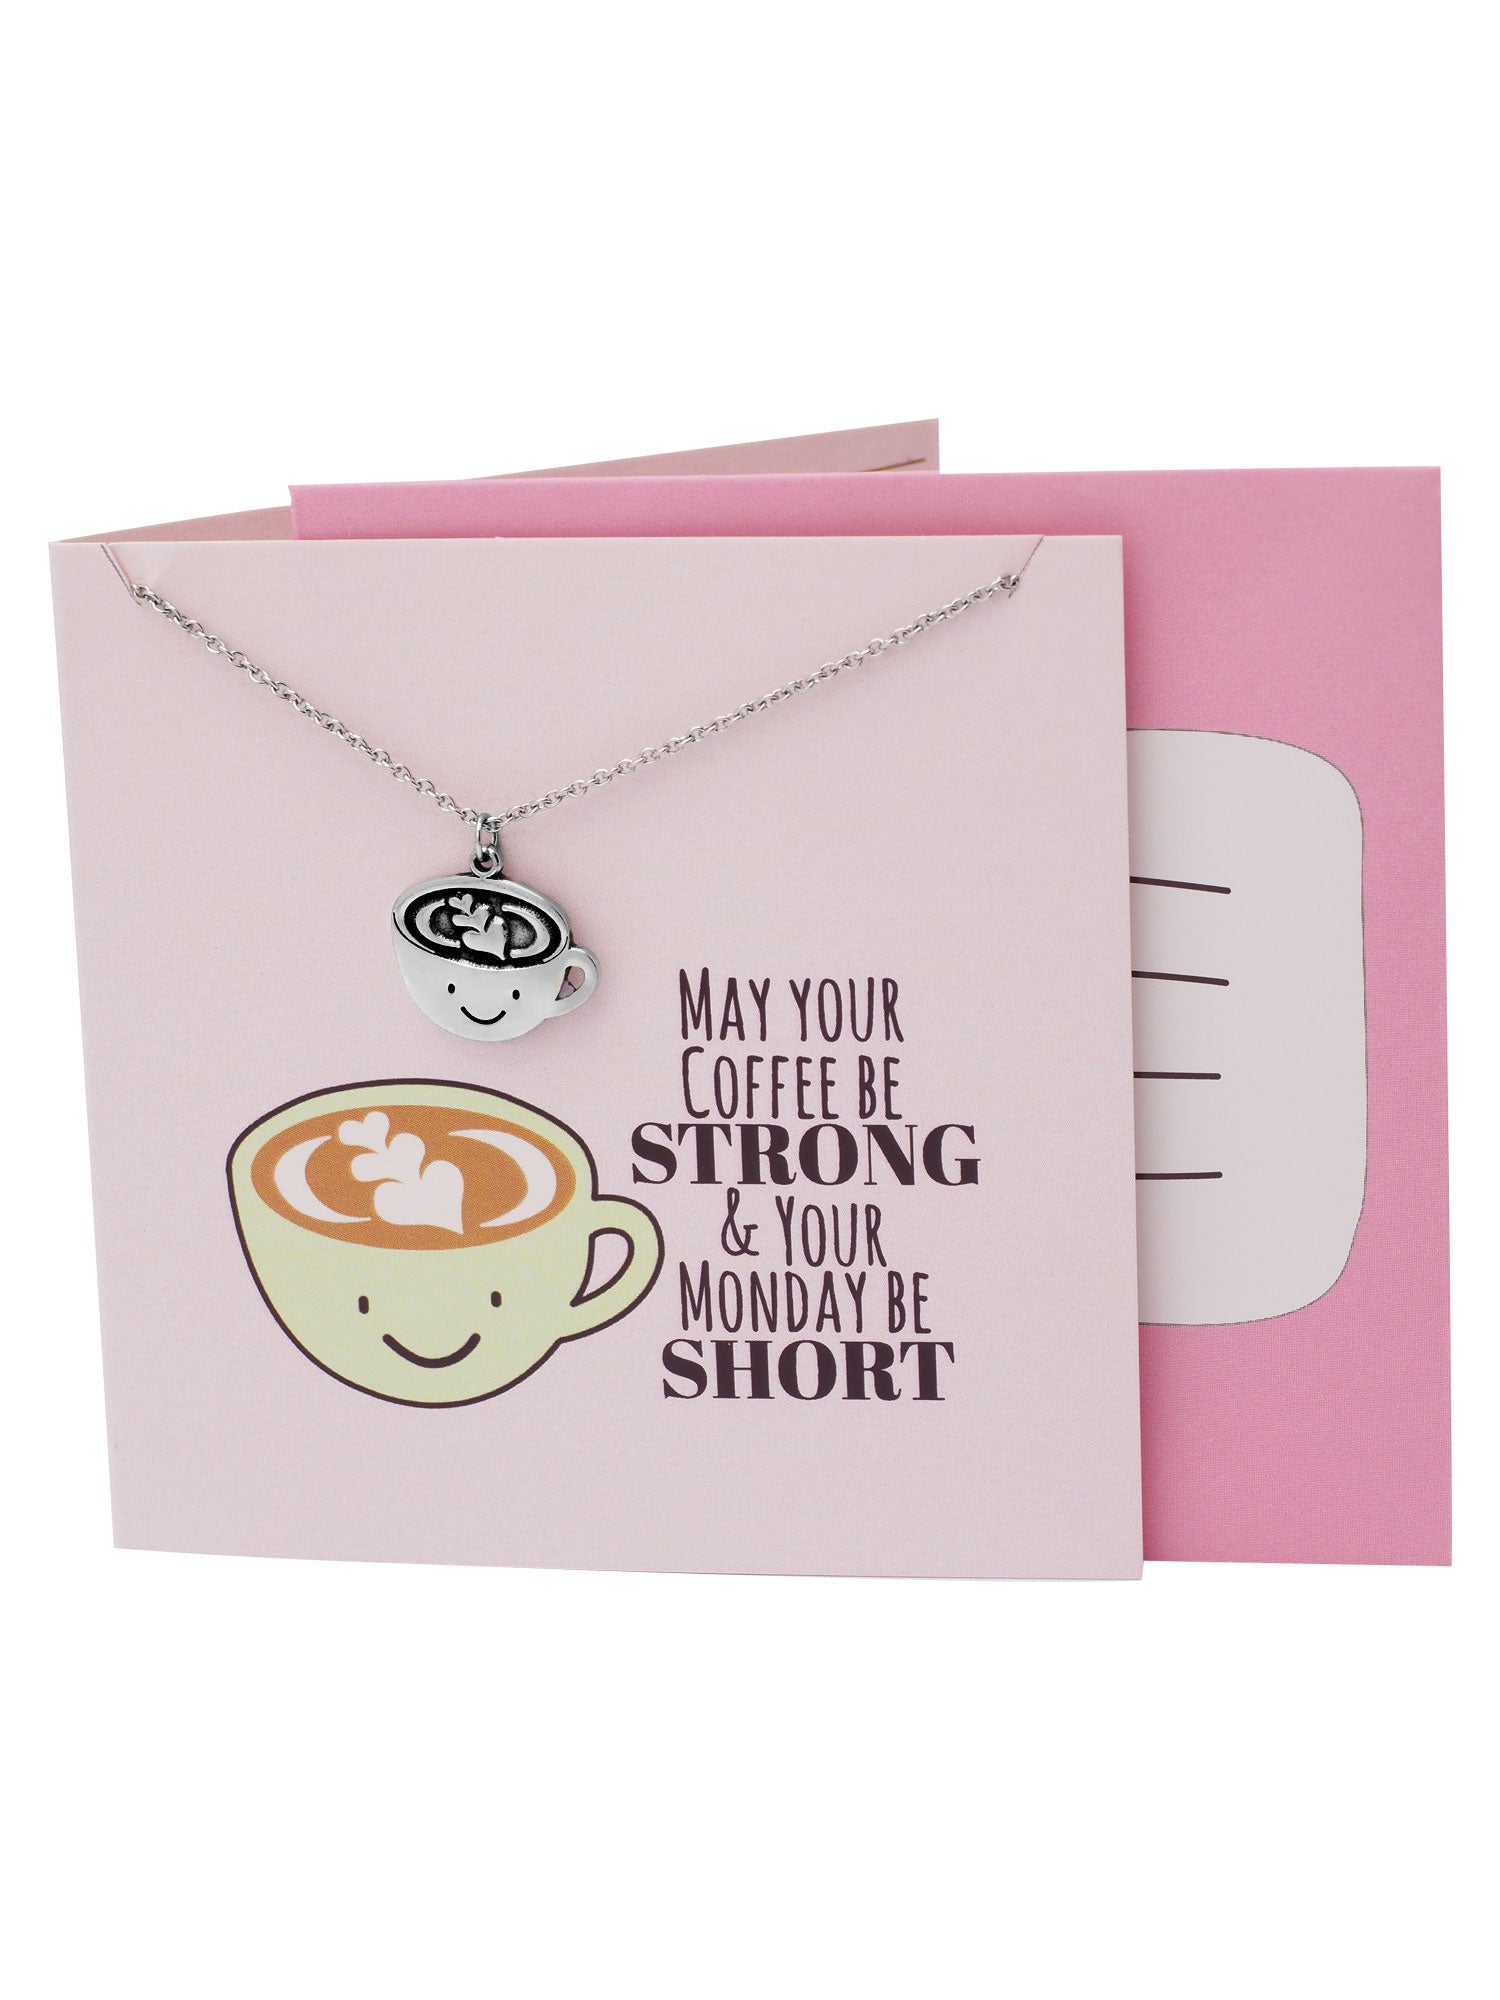 Olive Funny Puns Birthday Cards, Necklace Gifts for Coffee Lovers